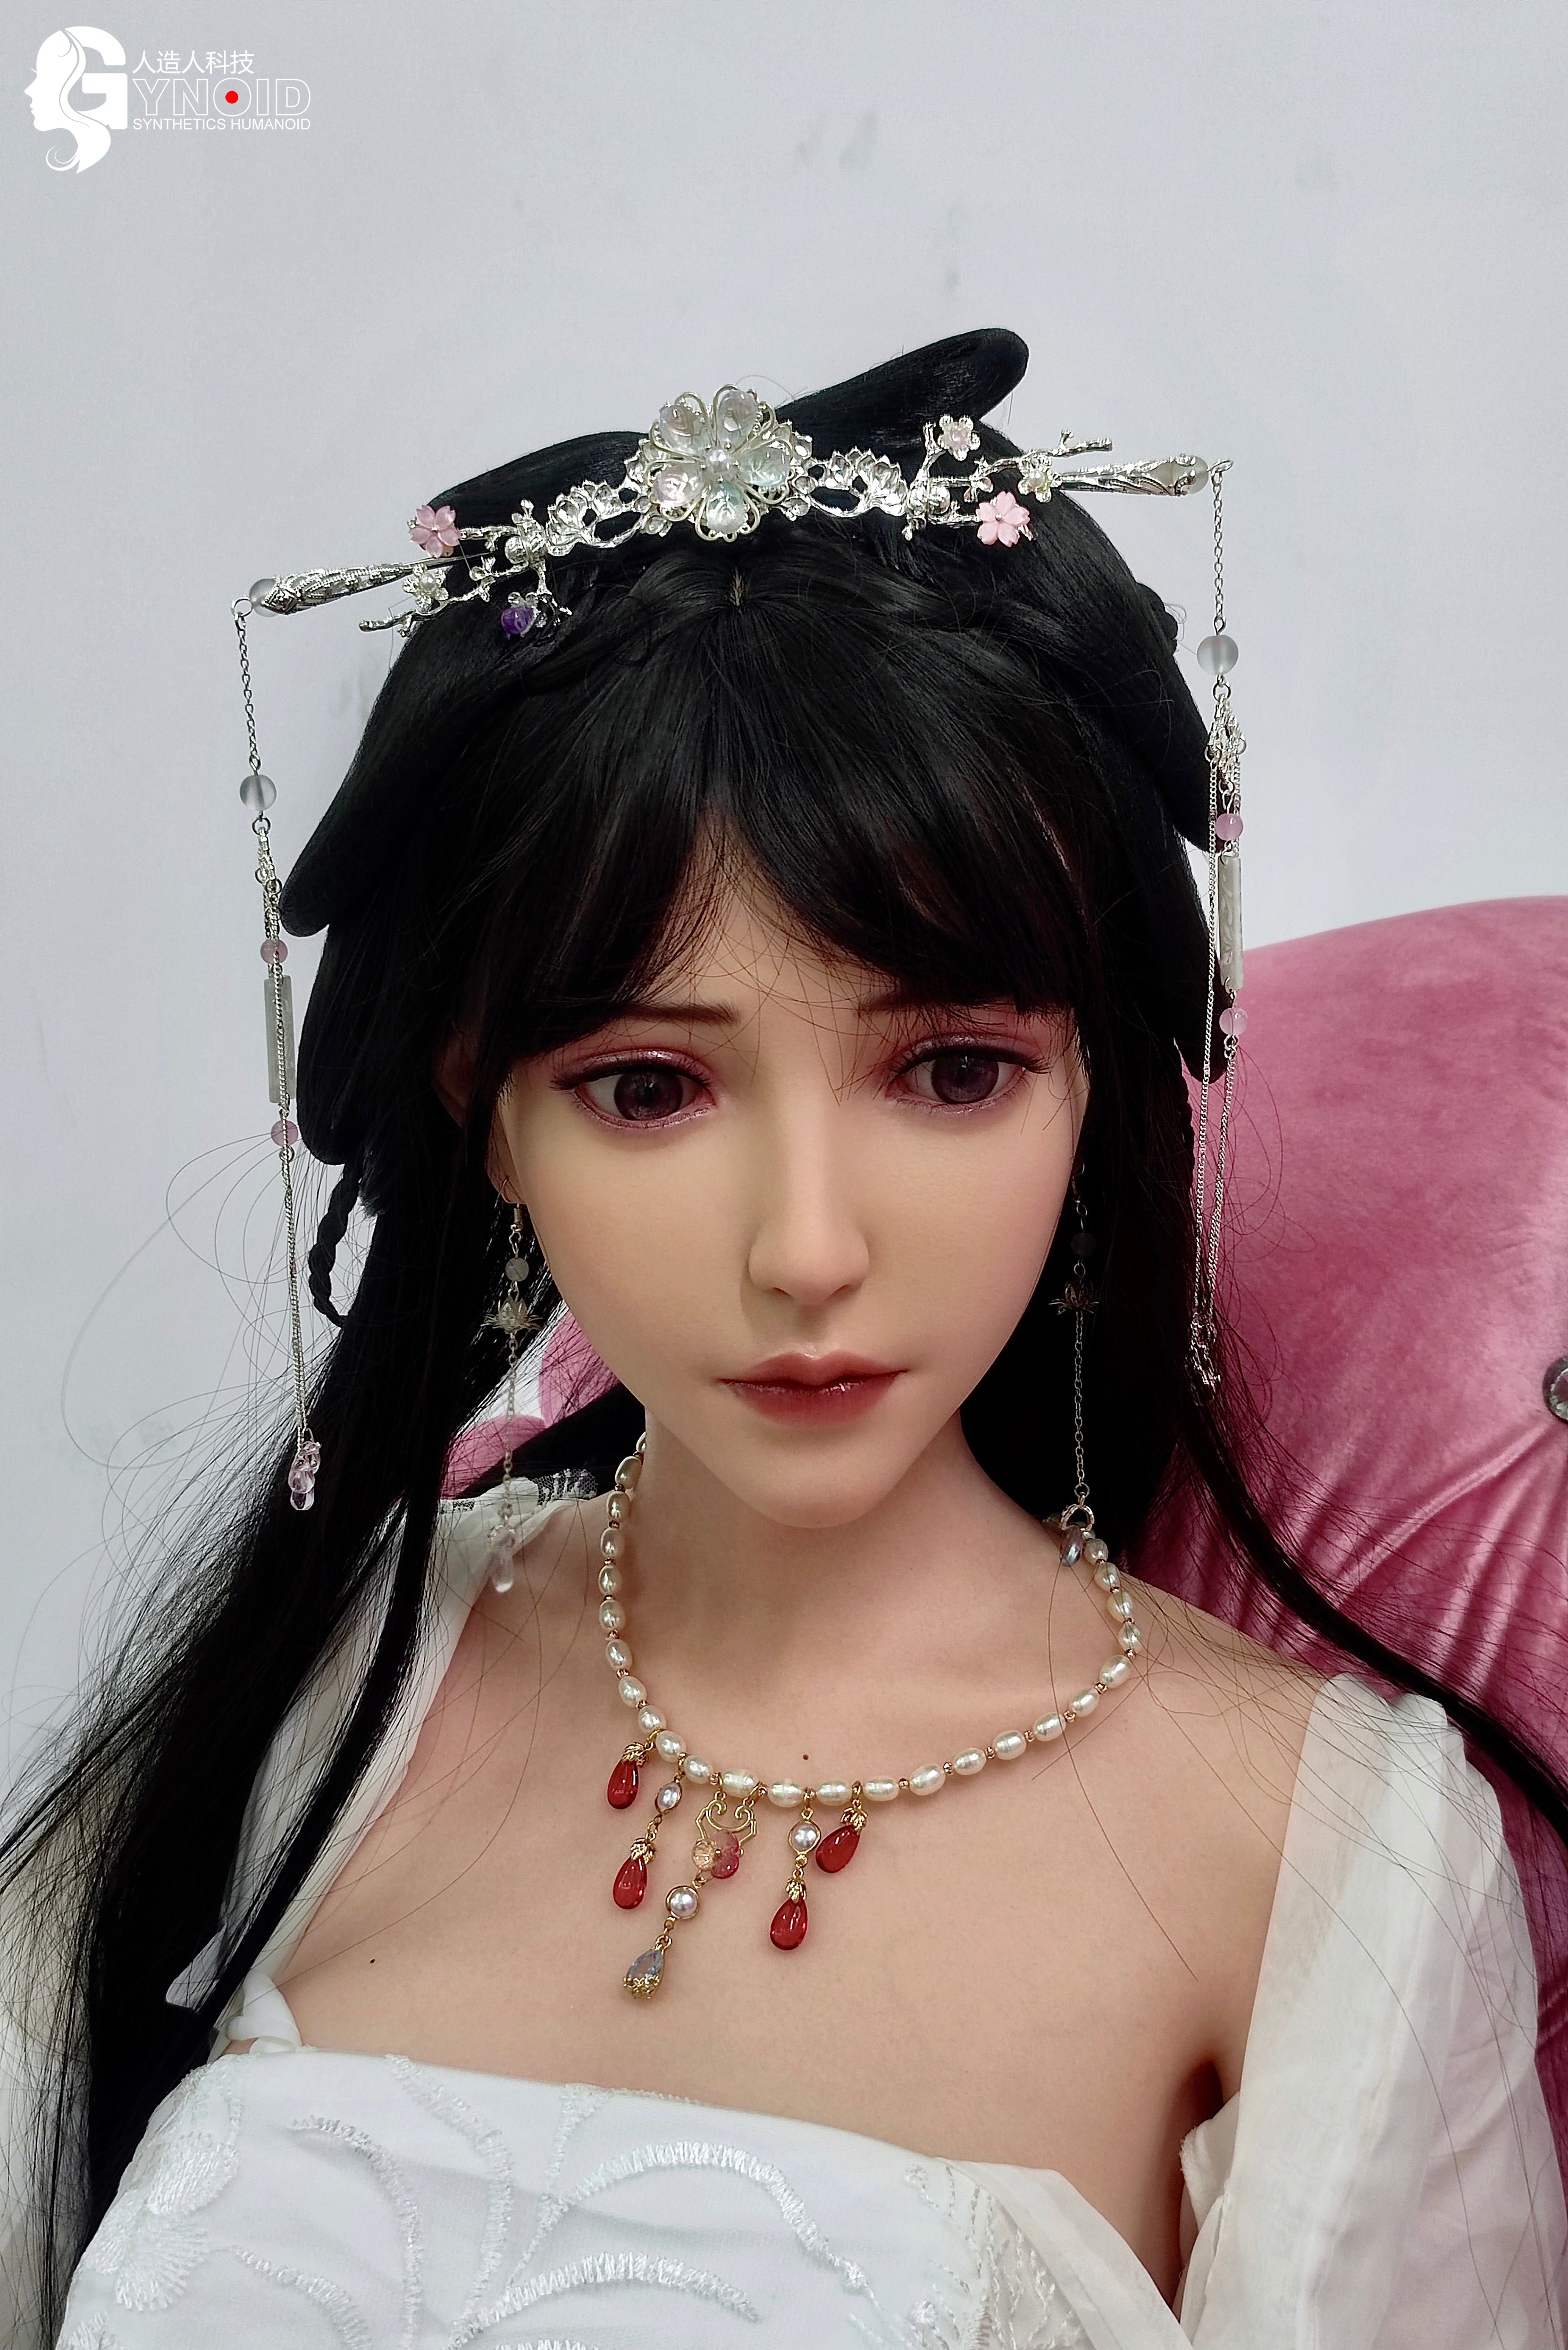 Gynoid Doll 168 cm Silicone - Arina | Buy Sex Dolls at DOLLS ACTUALLY